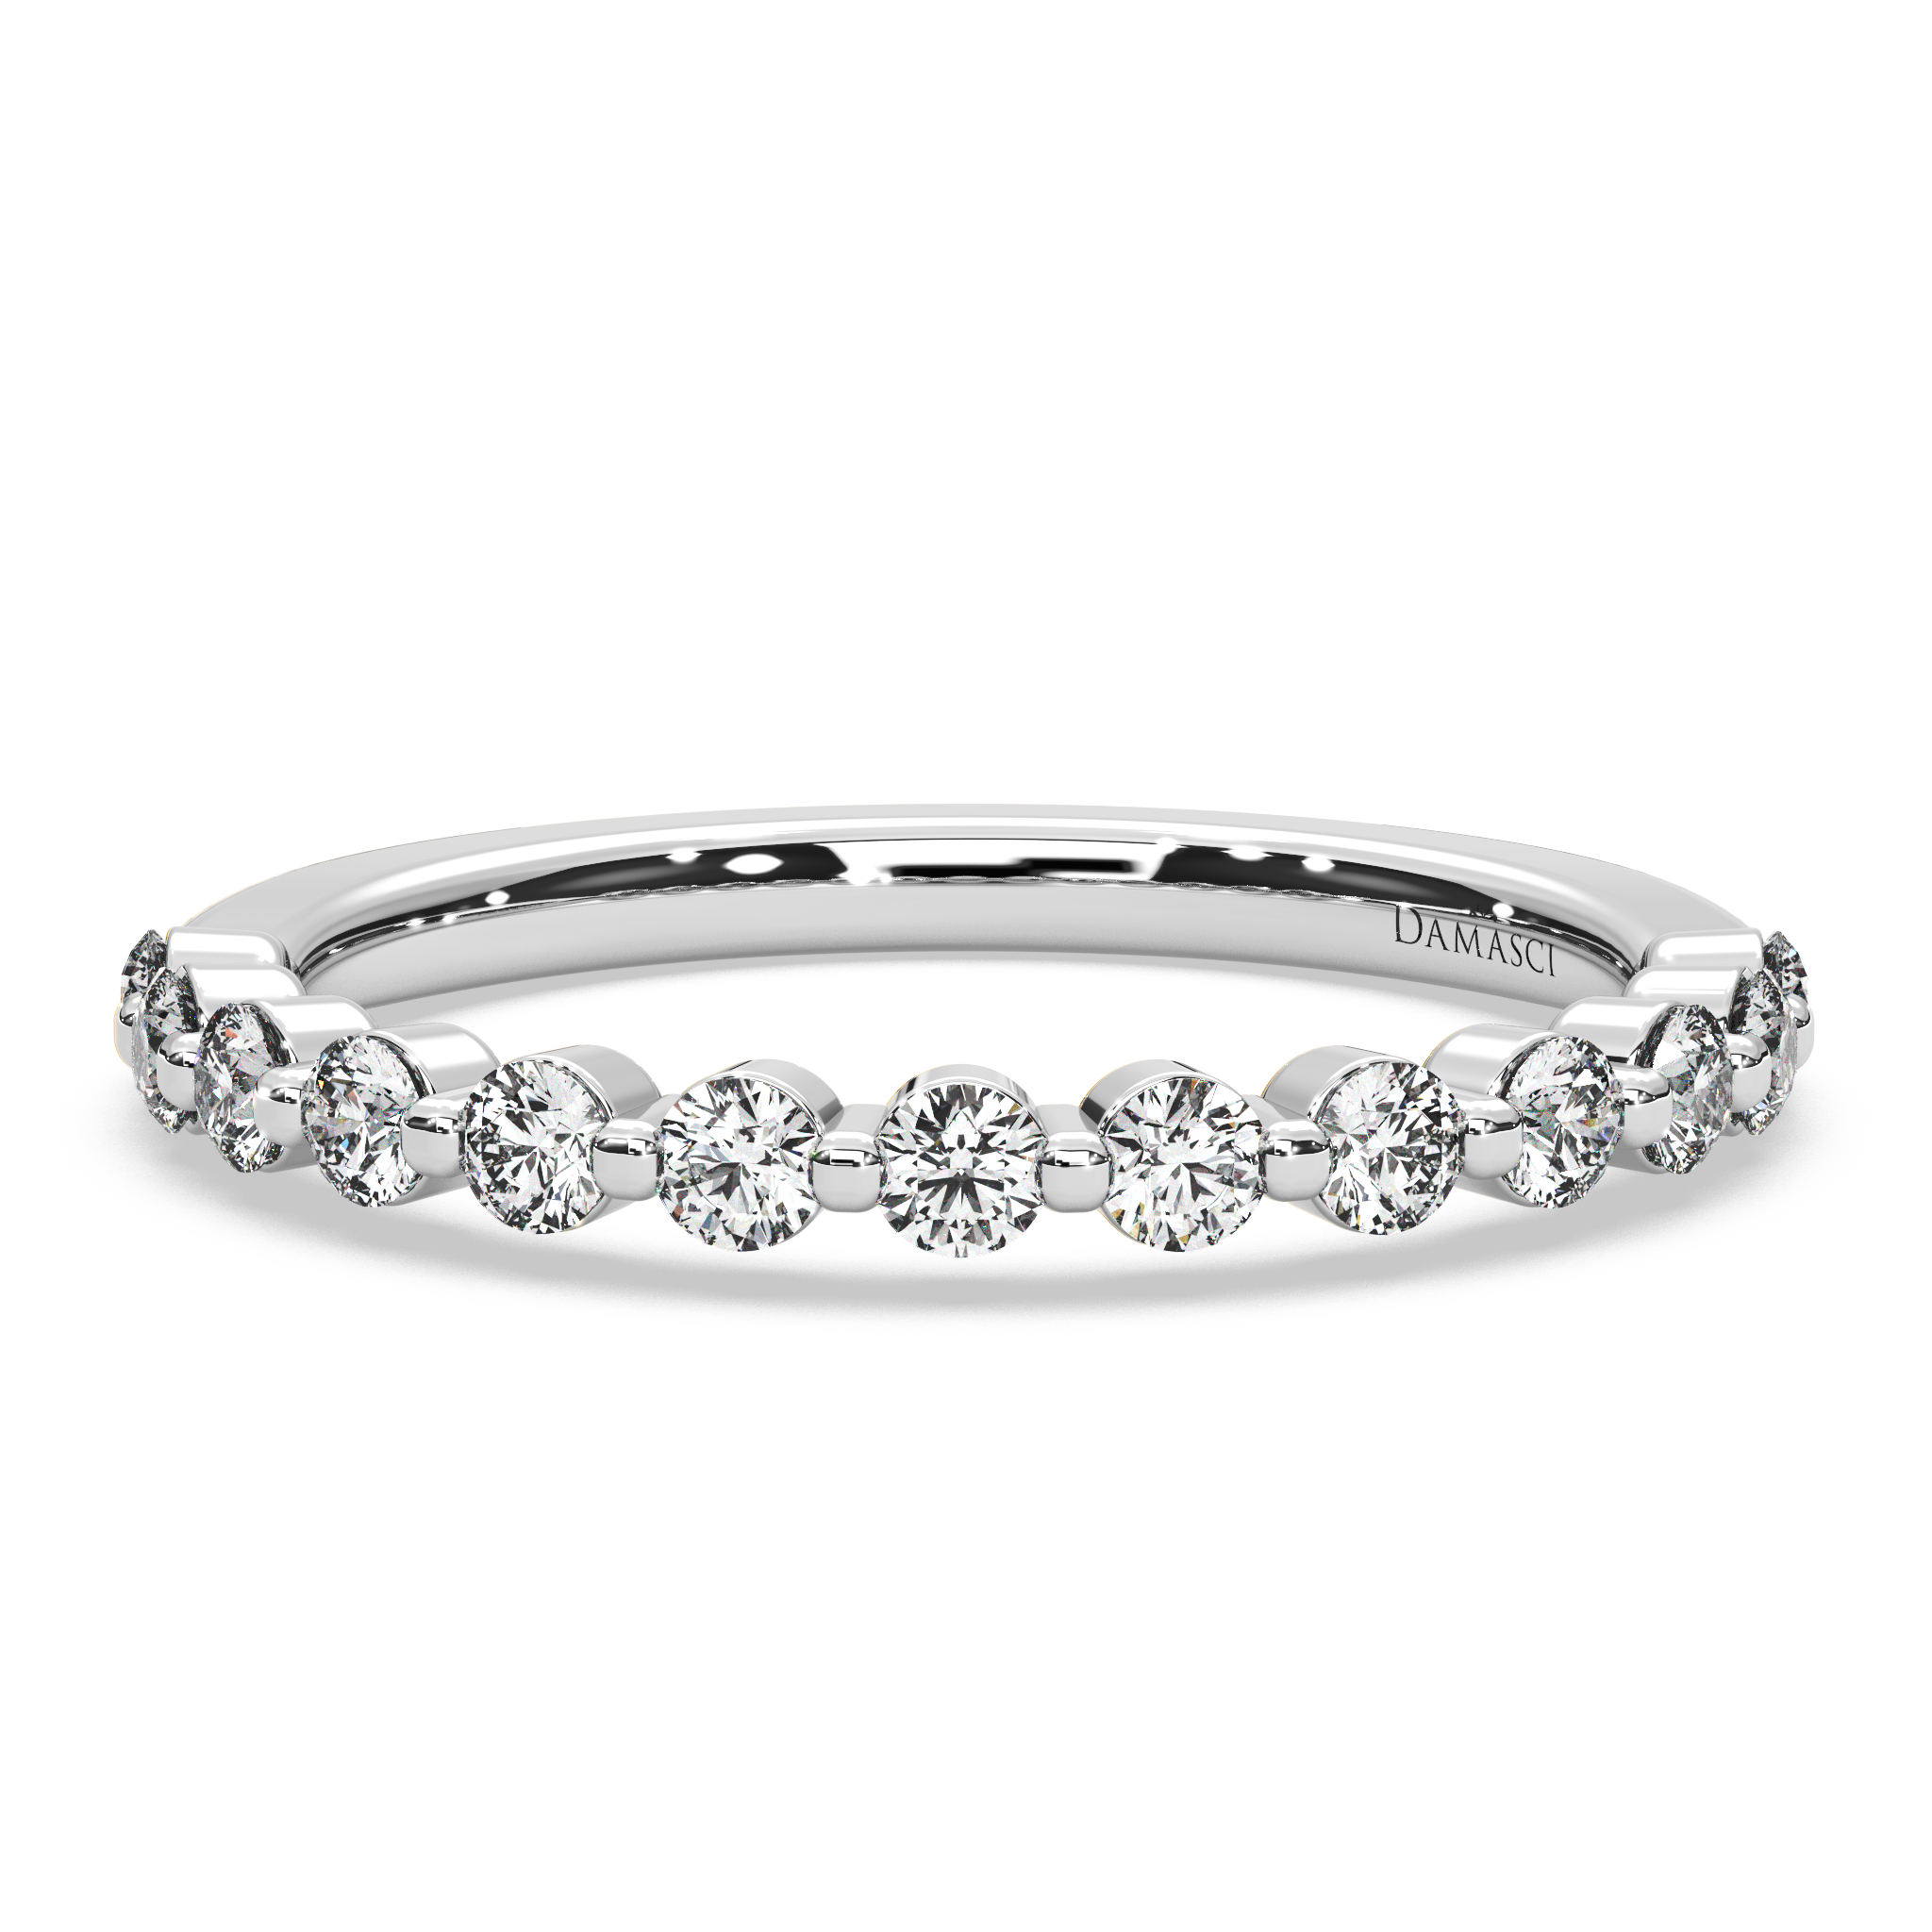 Rounds in Single Prong Wedding Ring